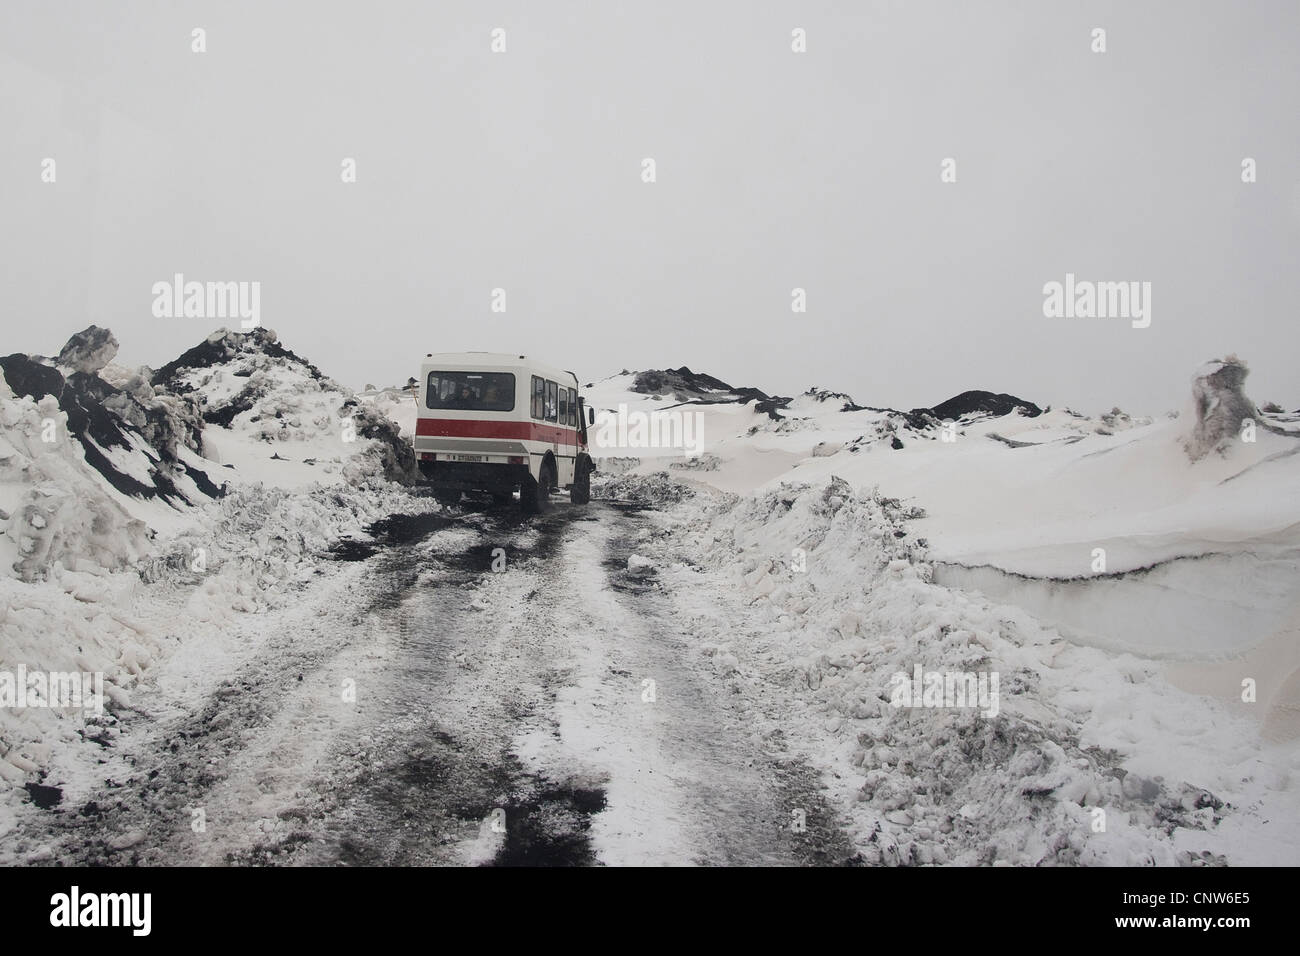 bus with torurist on a snocovered top of Mount Etna, Italy, Sicilia Stock Photo